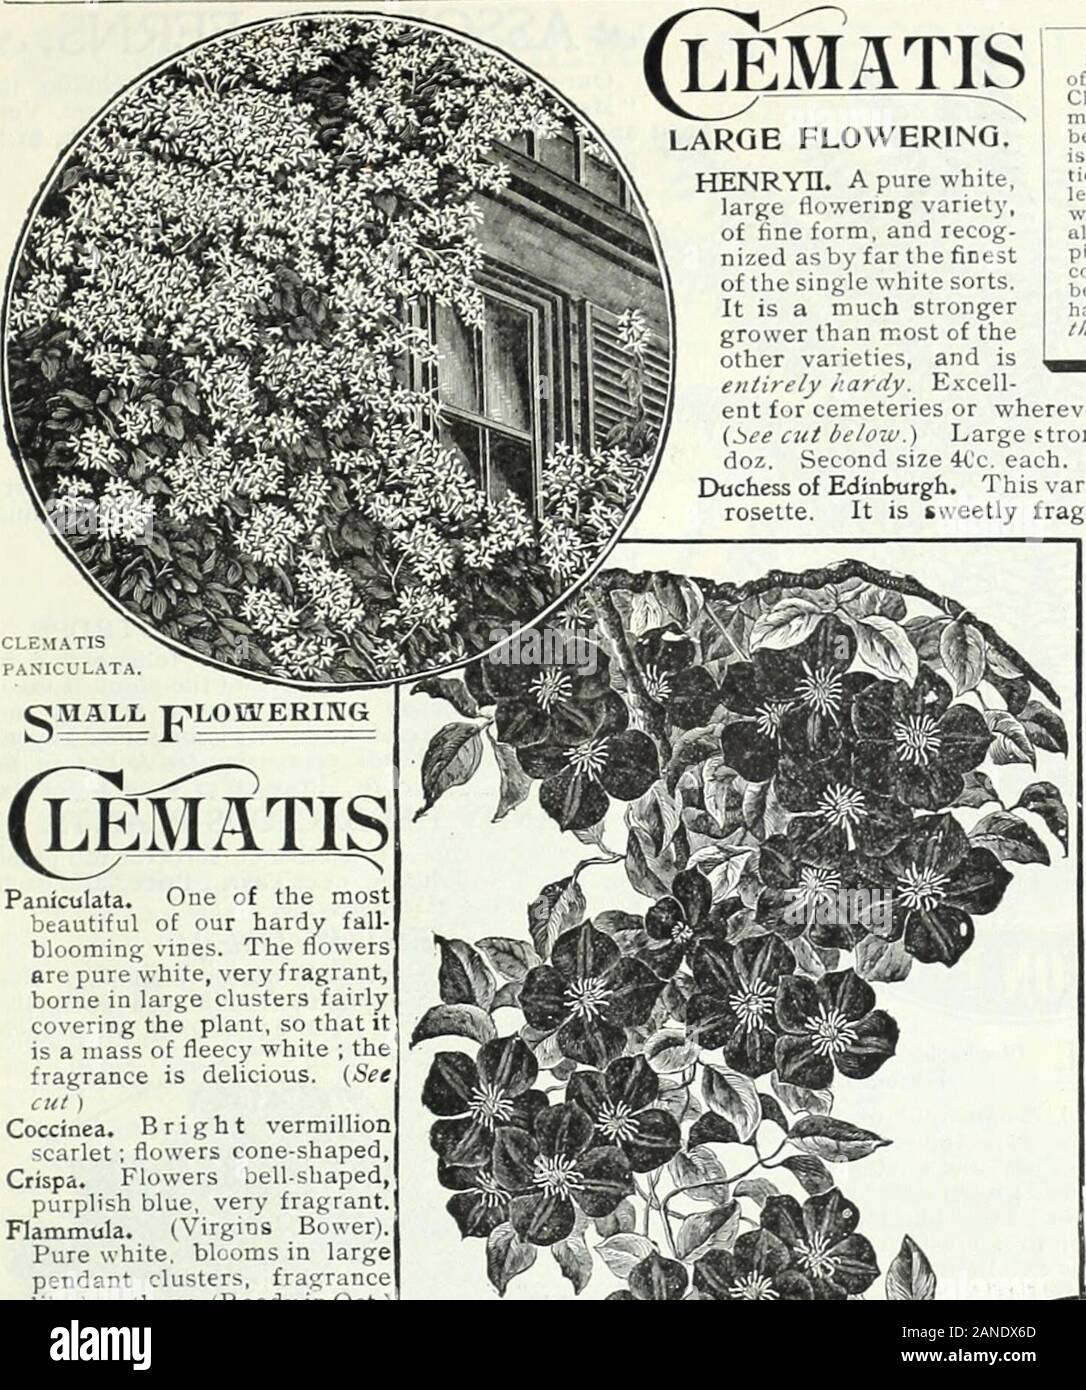 Autumn bulb catalogue : 1900 . ss for weeks afterbeing cut. A fine house plant, as it withstandsdry atmosphere. Price, fine plants from 5-inchpots. 40c. each, $-1.00 per doz. Vouug plants fromsmall pots, 2Cc each, $2.00 per doz. Plumosus Nanus. [Clhnbiug Lac Fcrti.) Brightgreen leaves, gracefully arched, and as finelywoven as silken mesh, retaining their freshnessfor weeks when cut. Large plants, 50c each,$4.50 per doz. Plants from 2-inch pots, 20c. each,12.00 per doz. ; Tenutssimus. Very fine filmy foliage. A hand-some climbing plant for the window. Plants from4-inch puts, :!0c. each, |:5.00 Stock Photo